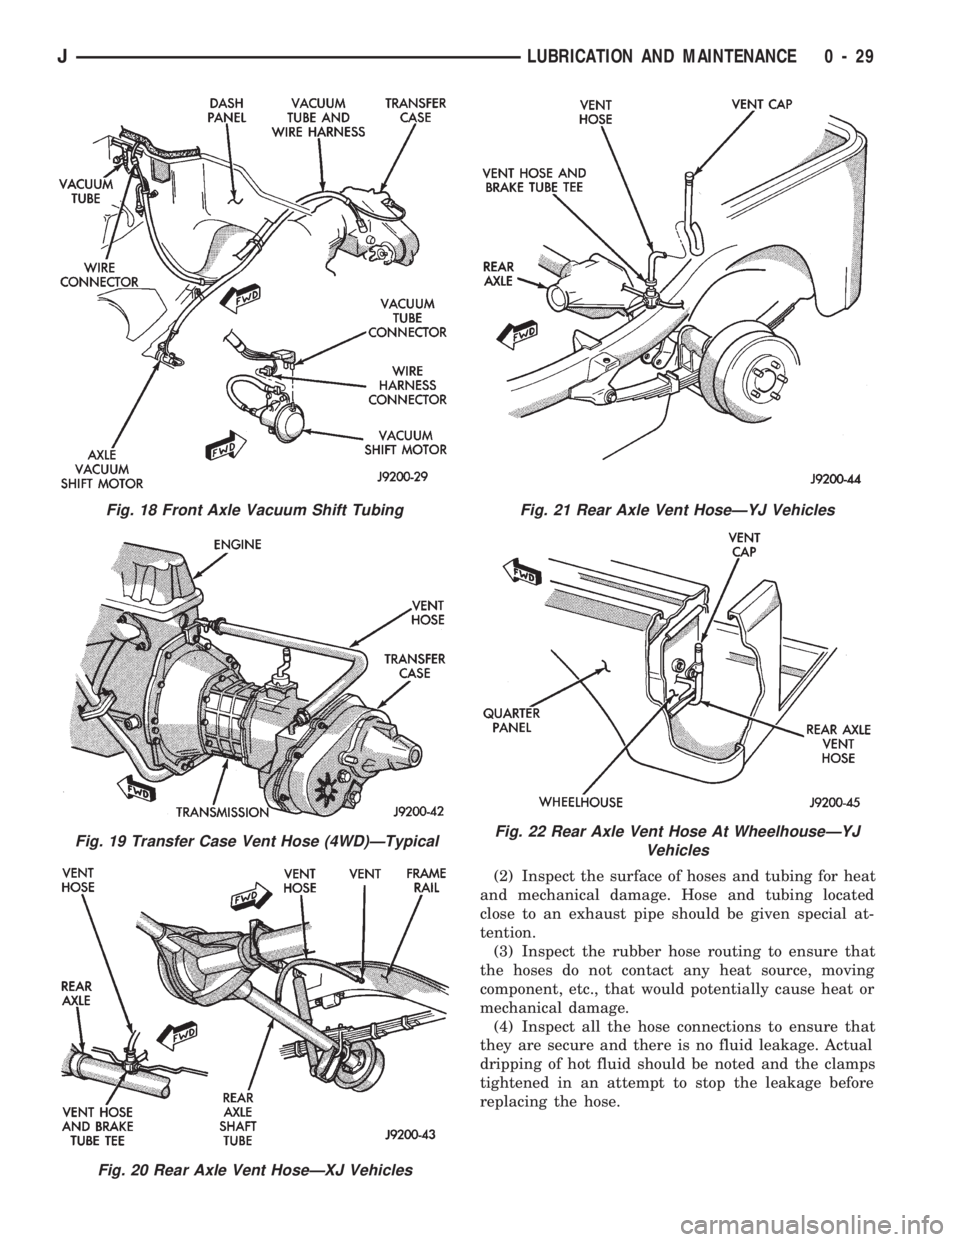 JEEP WRANGLER 1994 Service Manual Fig. 19 Transfer Case Vent Hose (4WD)ÐTypical
Fig. 20 Rear Axle Vent HoseÐXJ Vehicles
Fig. 21 Rear Axle Vent HoseÐYJ Vehicles
Fig. 22 Rear Axle Vent Hose At WheelhouseÐYJ
Vehicles
JLUBRICATION AND